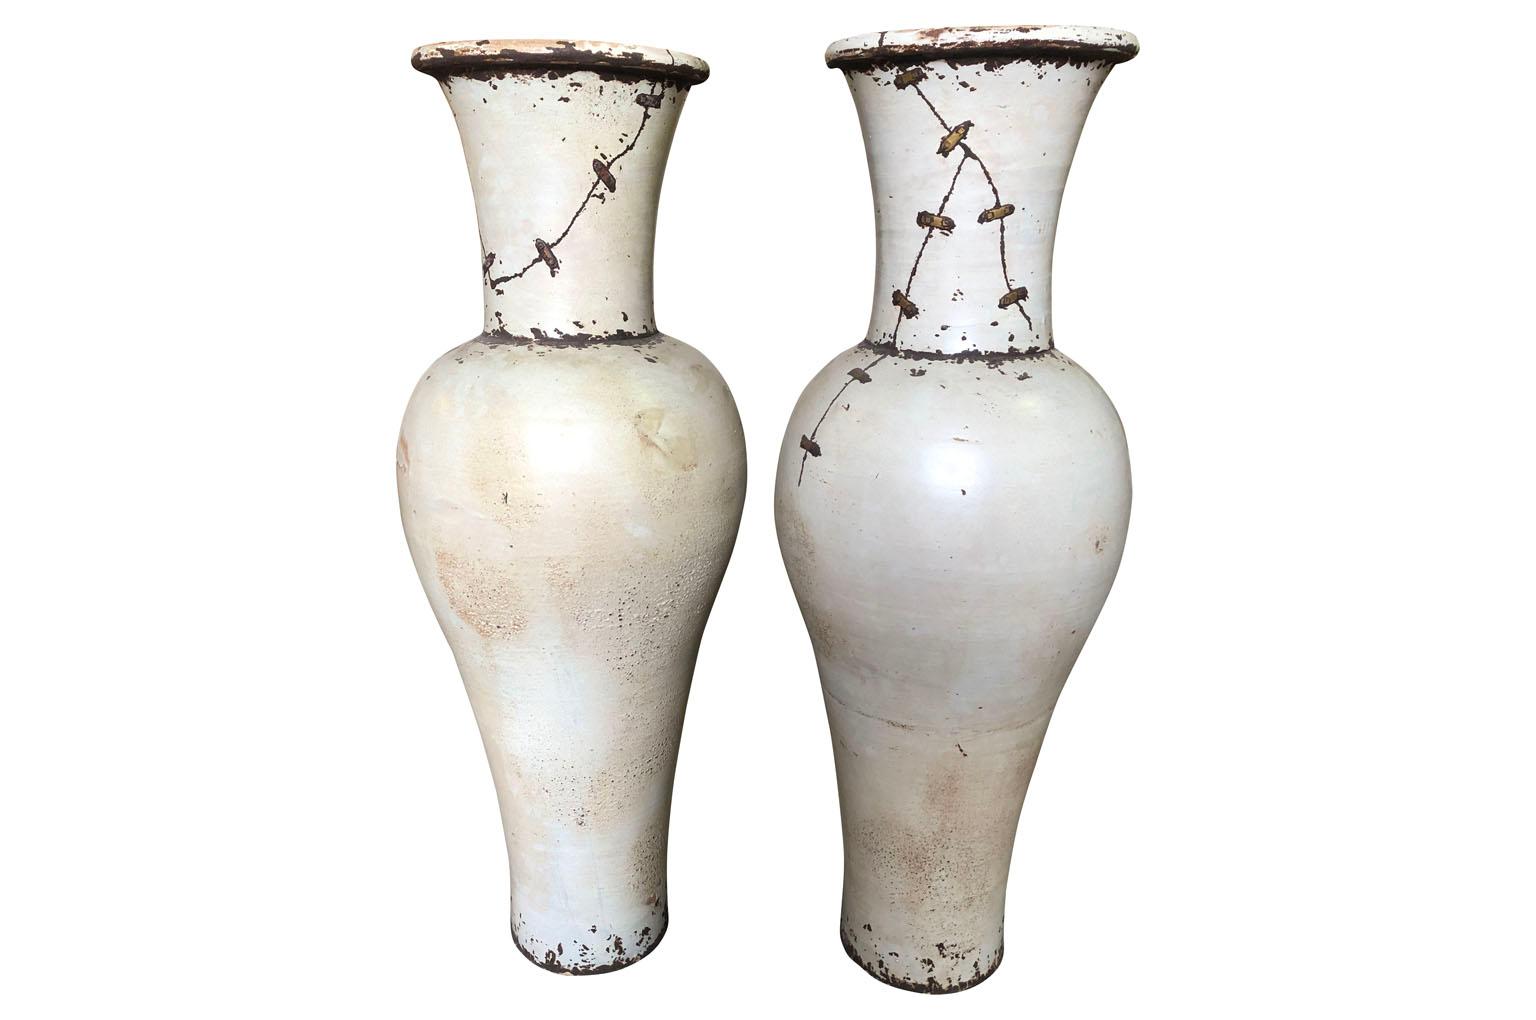 A fabulous pair of grand scale mid-20th century glazed ceramic vases from the South of France. Elegant minimalist lines with wonderful metal detailing.